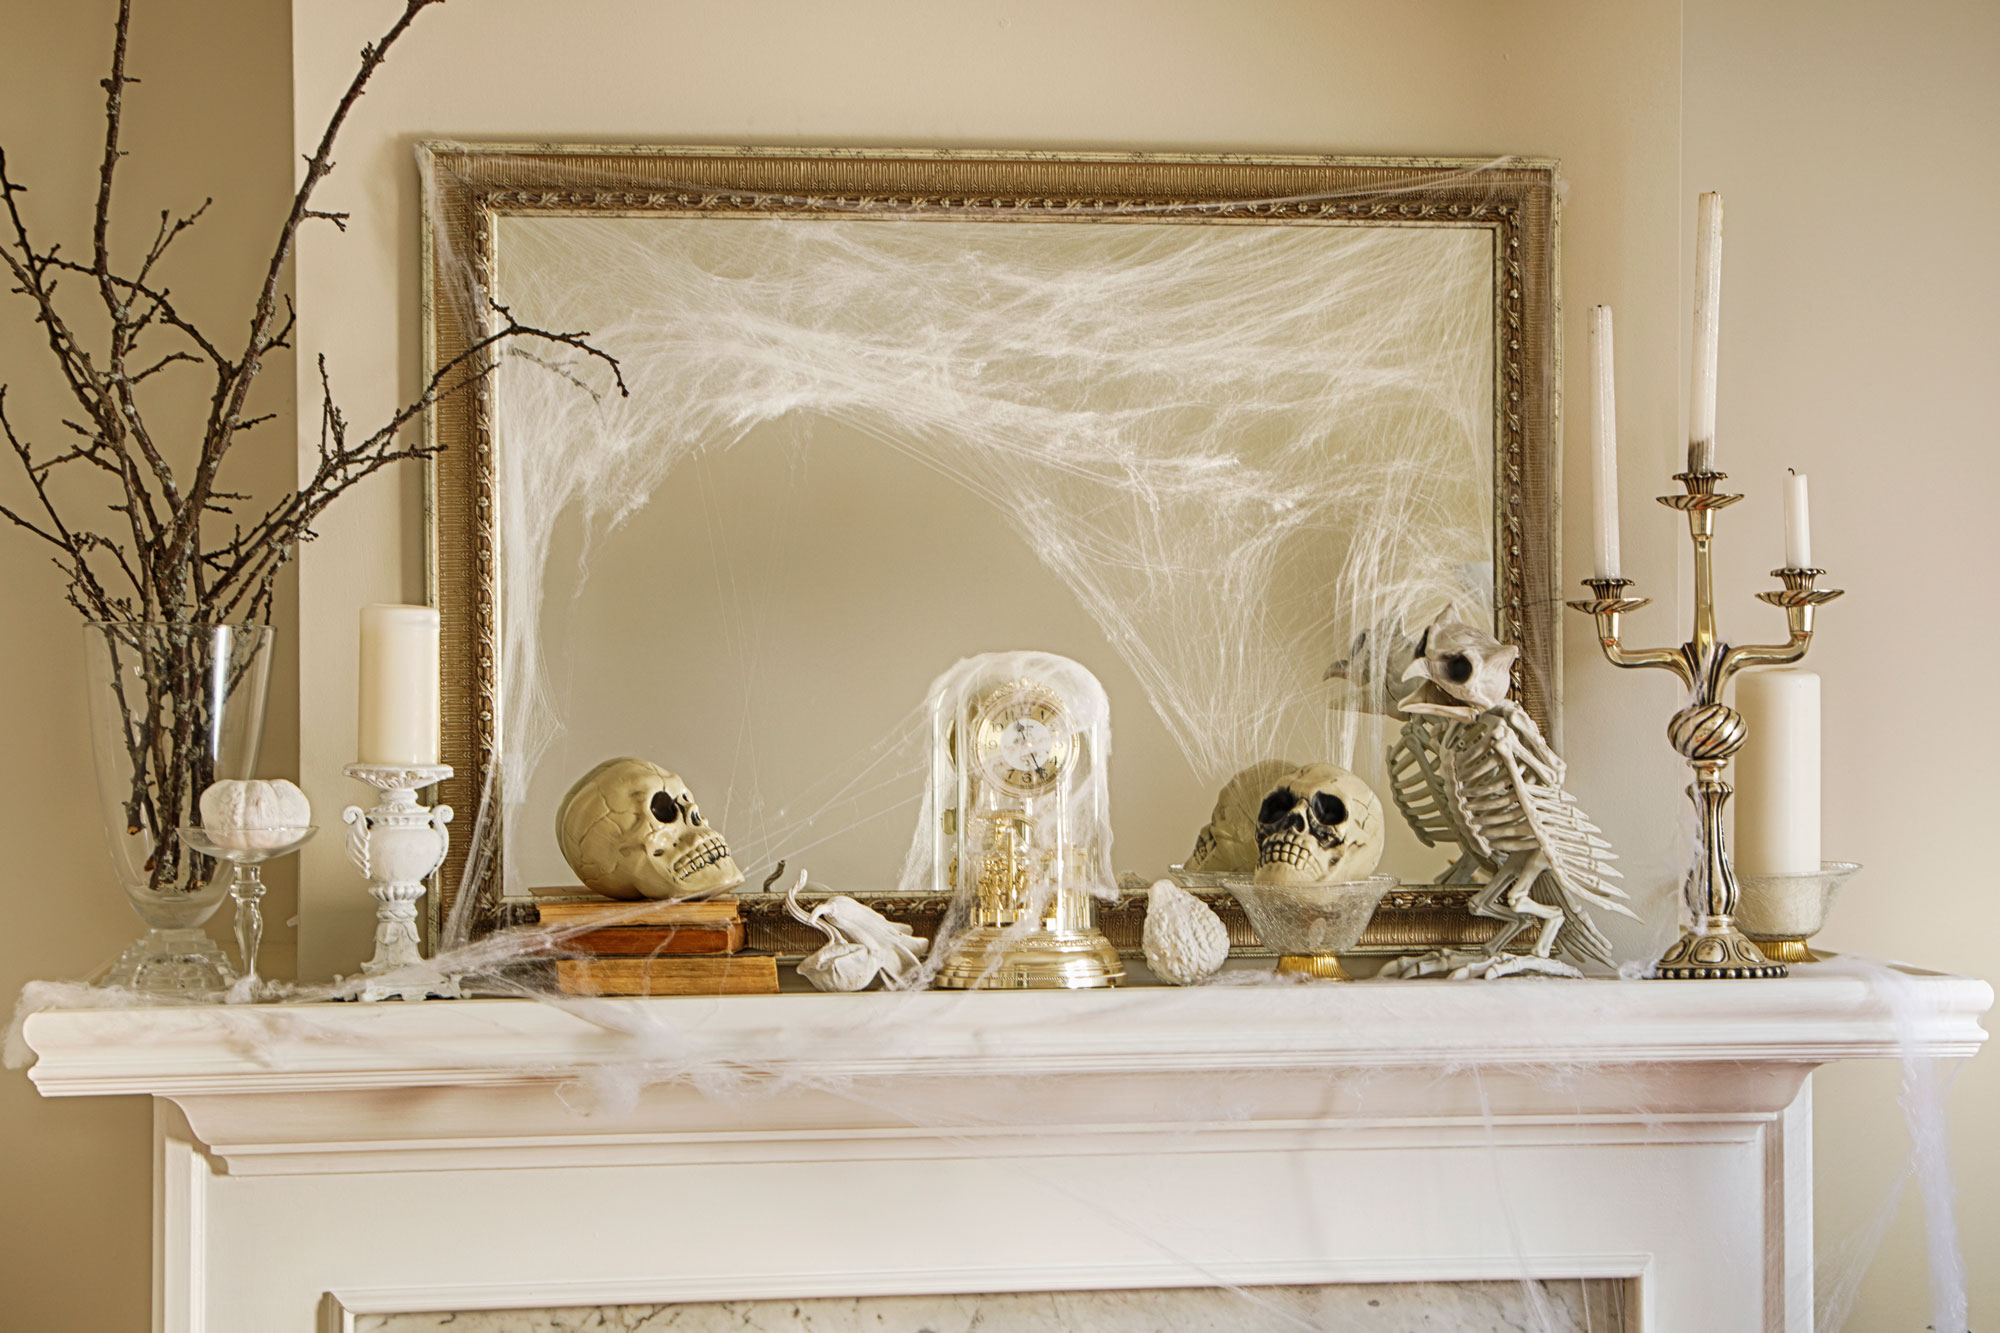 Fireplace mantel covered in Halloween decorations.